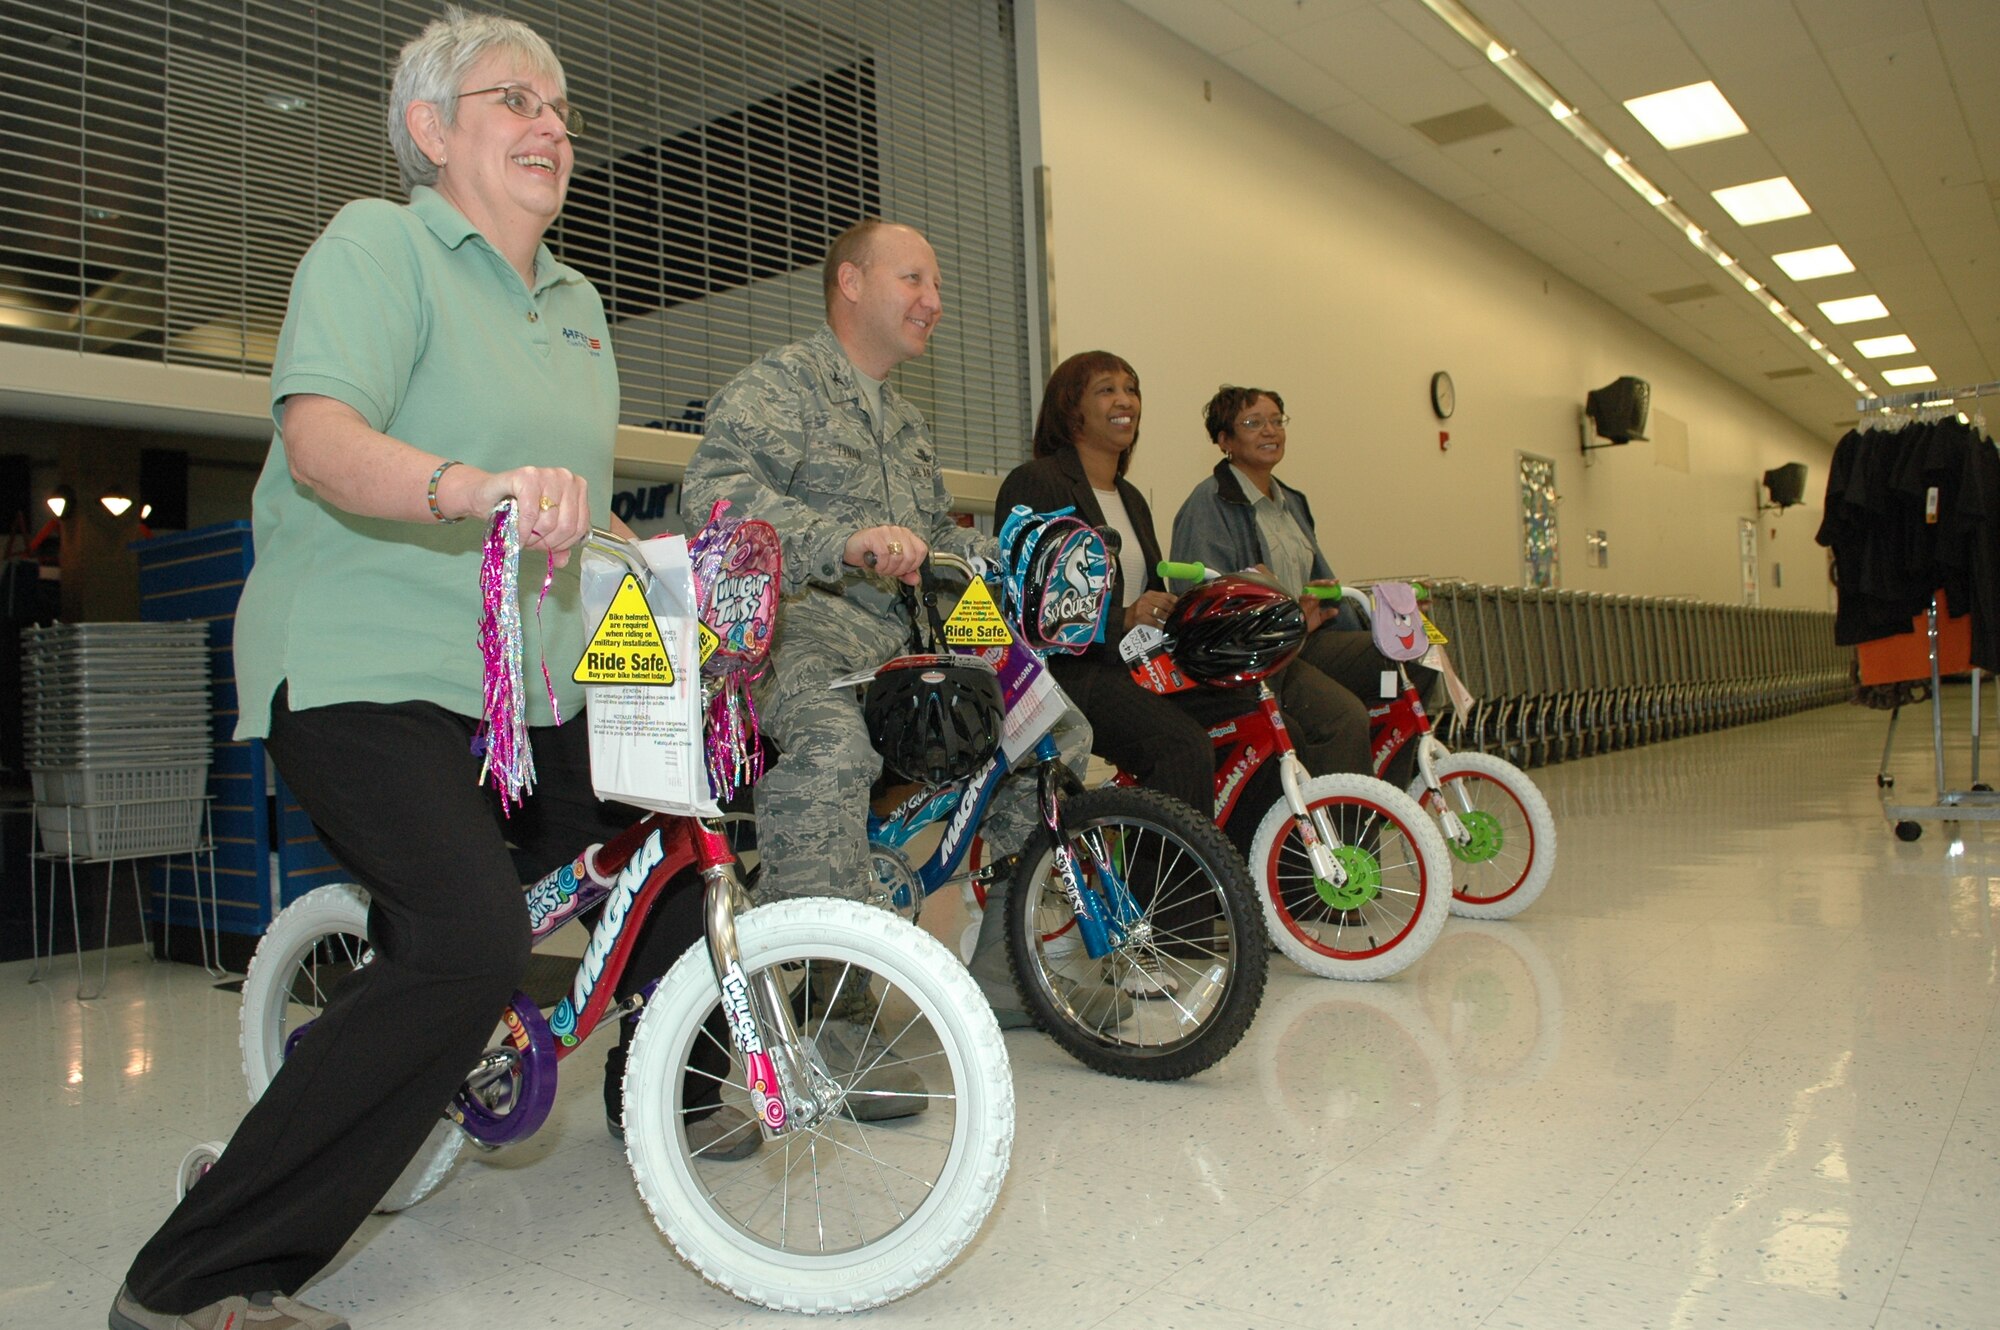 From left: Tinker exchange main store manager Catherine Jones, Oklahoma City Air Logistics Center’s Col. Tracy Tynan, exchange Human Resources Manager Sherilyn Benjamin and Base Exchange general manager Bettye Golston participate in a training wheels-only race in the Base Exchange Oct. 30 to help raise money for agencies tied to the Combined Federal Campaign, which runs through Nov. 14 and Tinker is on track to meet the goal of $1.65 million. “It’s great that we could all come out and support this. It’s a worthy cause. The exchange is an organization that helps Tinker reach for it’s CFC goals, year in and year out,” said Colonel Tynan, an organizer for the CFC this year. (Air Force photo)